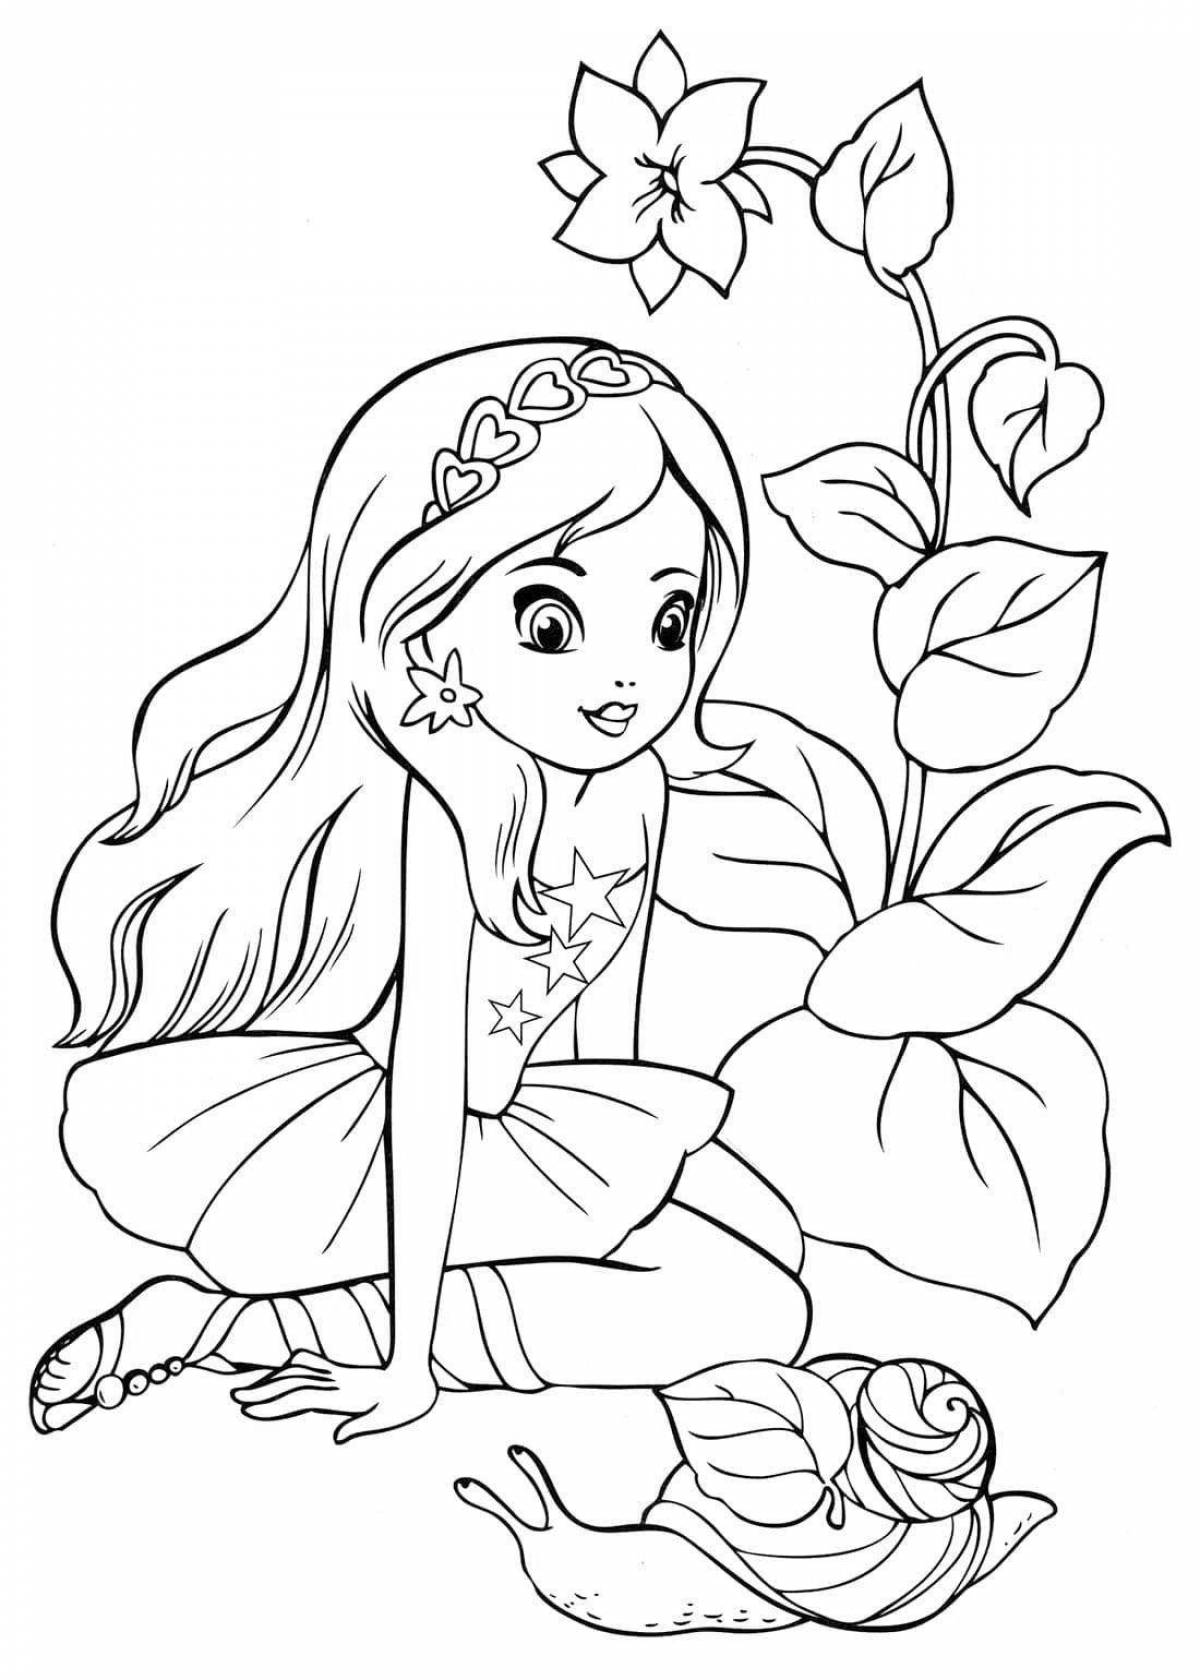 Coloring book shining baby download